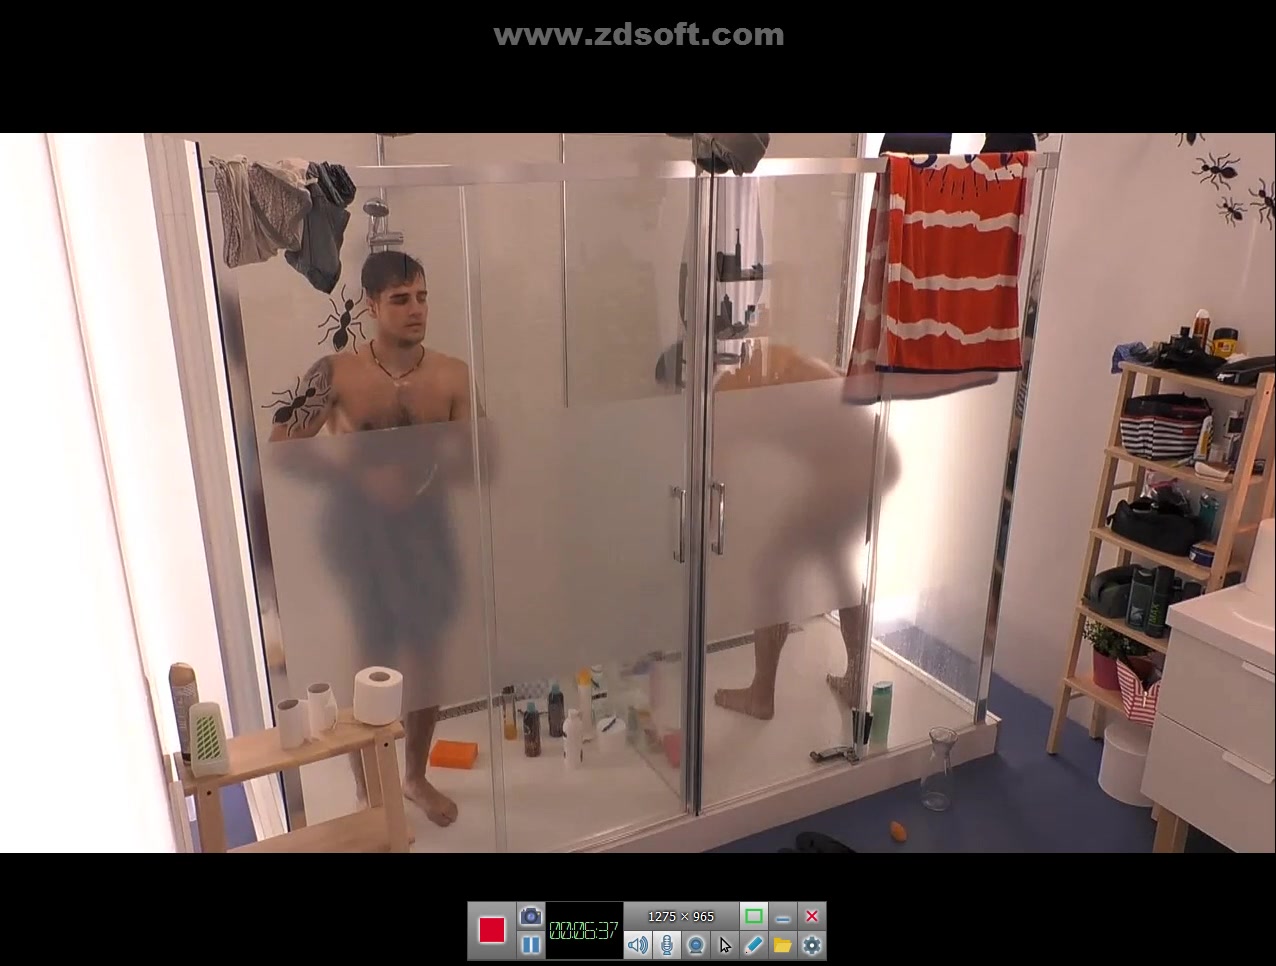 BIG BROTHER POLAND BOYS IN SHOWER 3